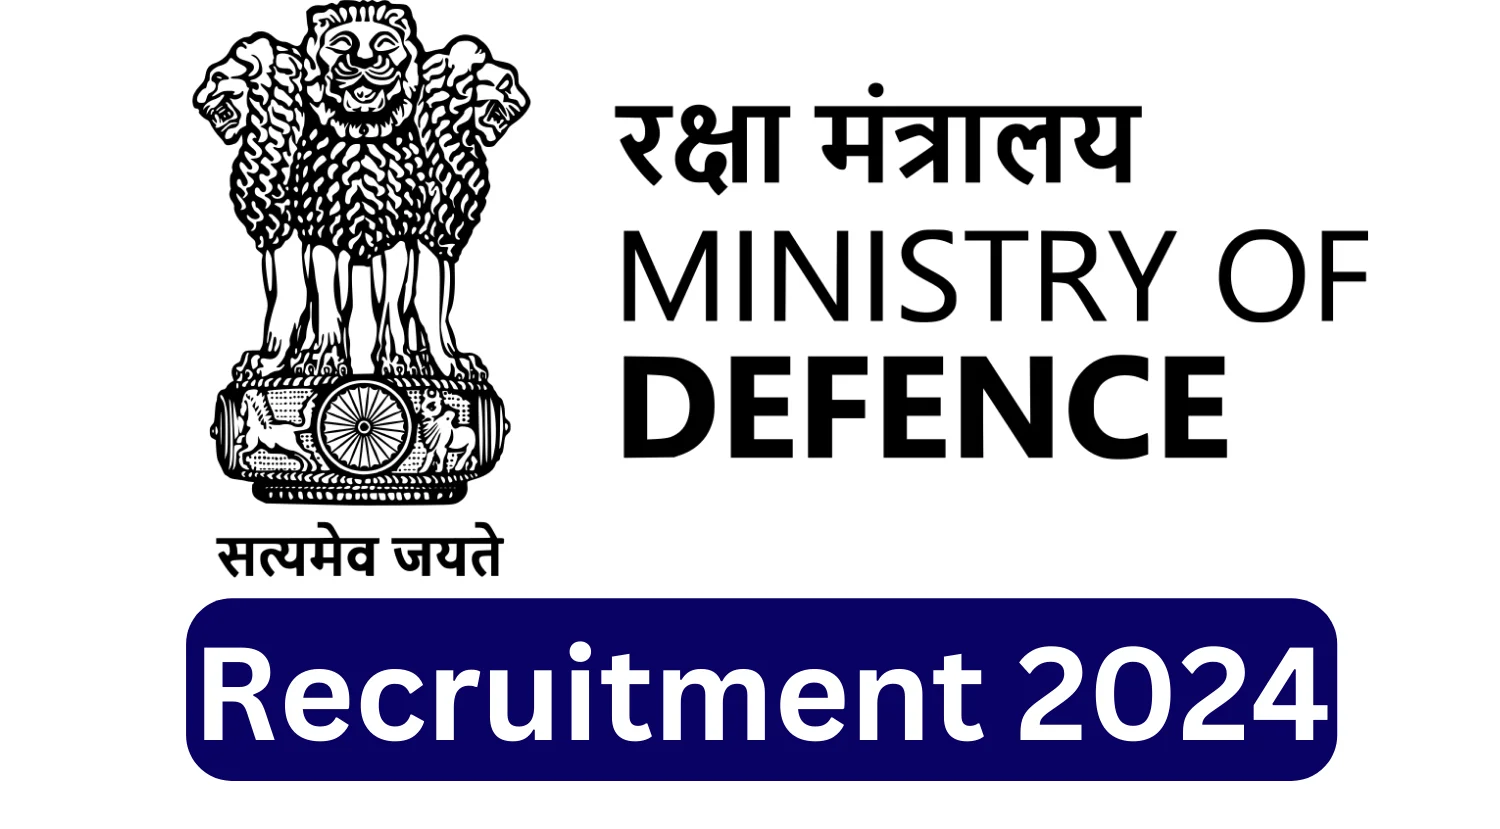 Ministry of Defence Recruitment 2024